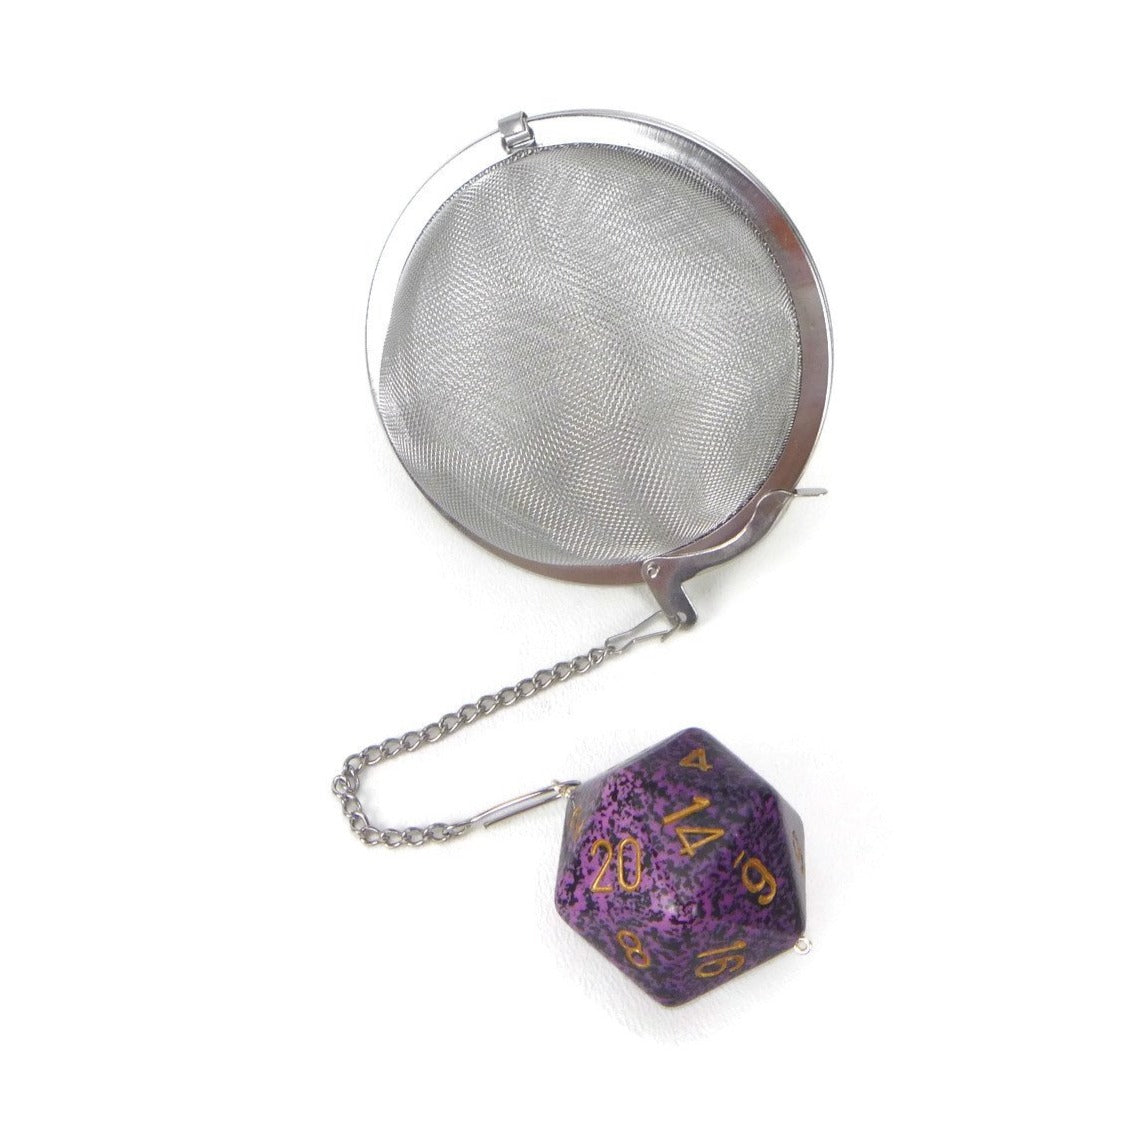 3 Inch Tea Infuser Ball with Large d20 - Hurricane Purple